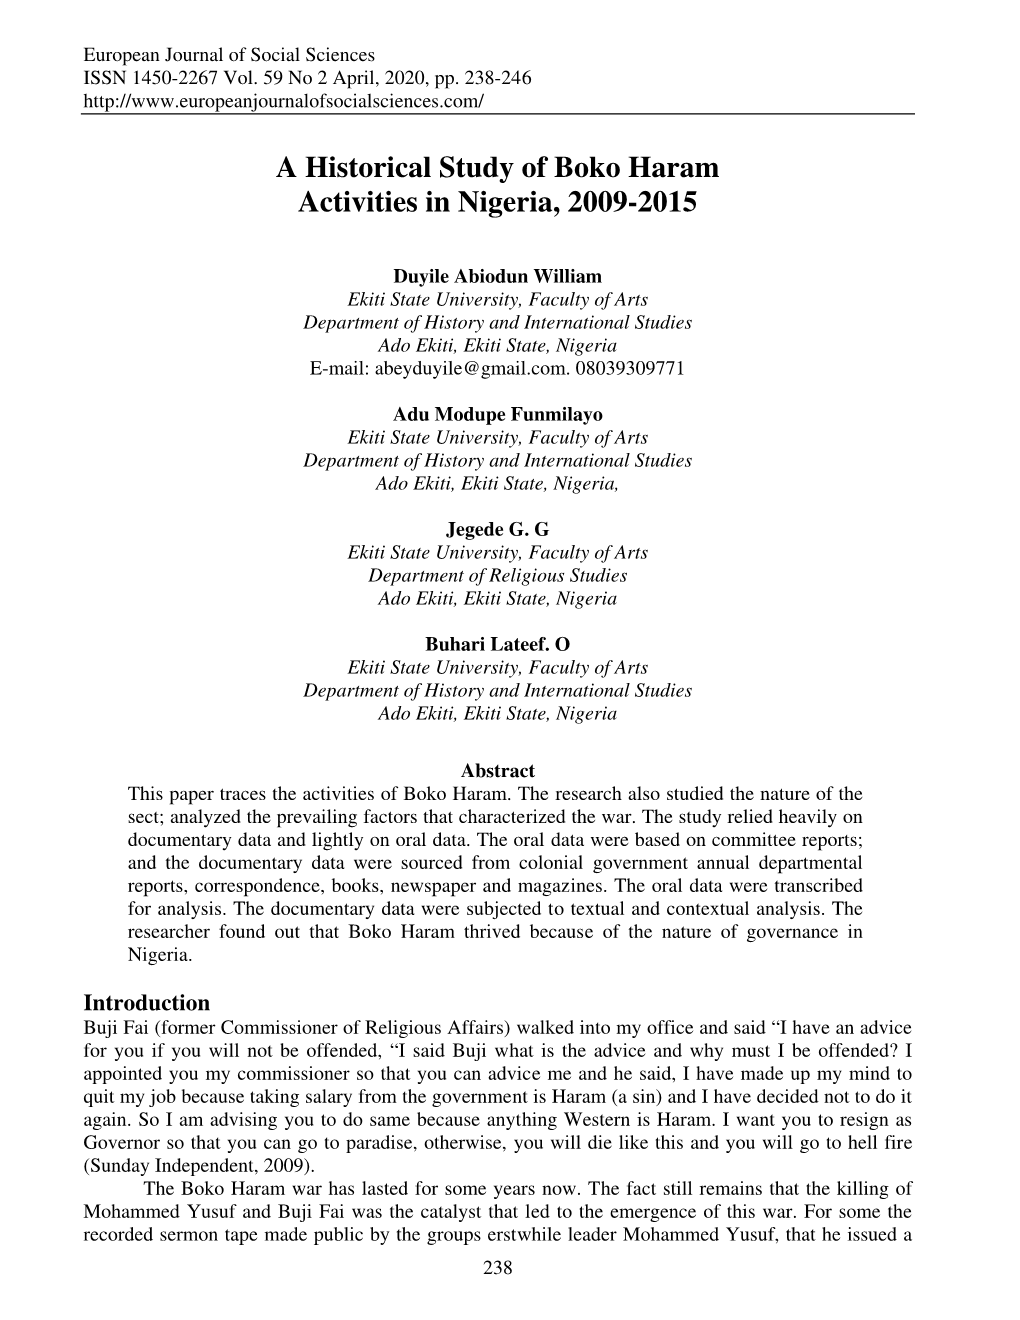 A Historical Study of Boko Haram Activities in Nigeria, 2009-2015